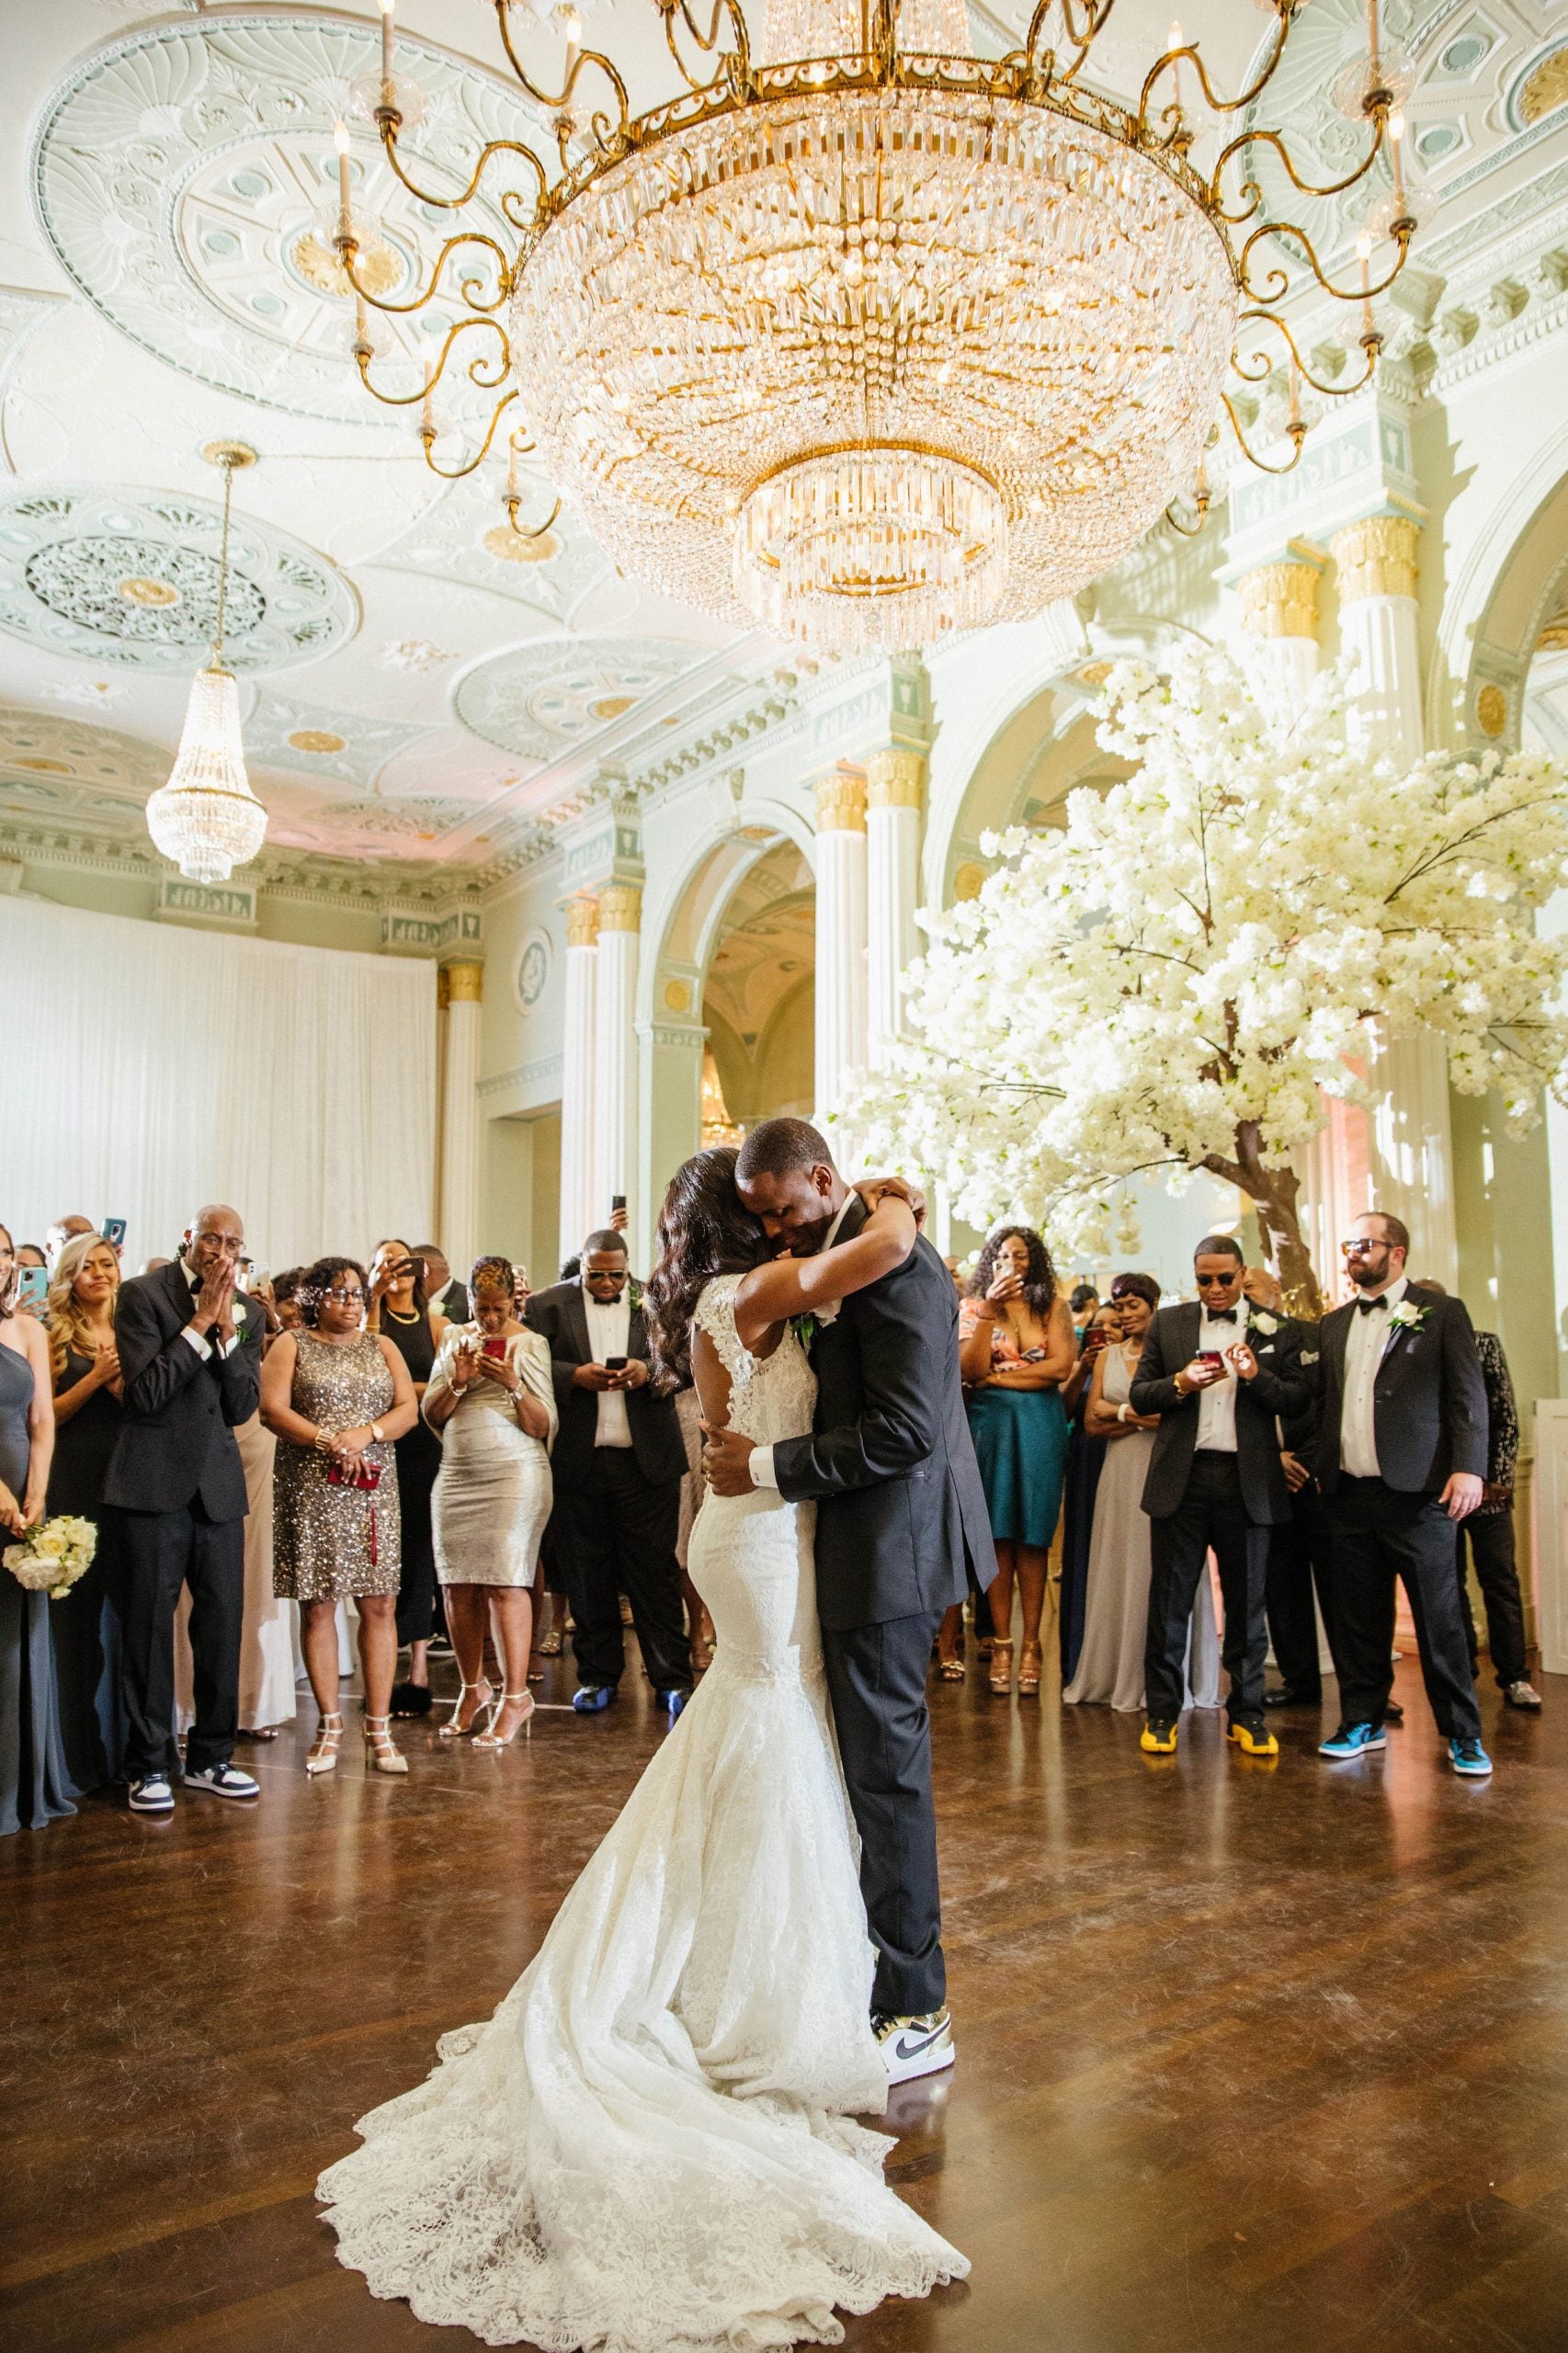 Bridal Bliss: Courtney And Torrey Said "I Do" In A Stunning Fourth of July Fête